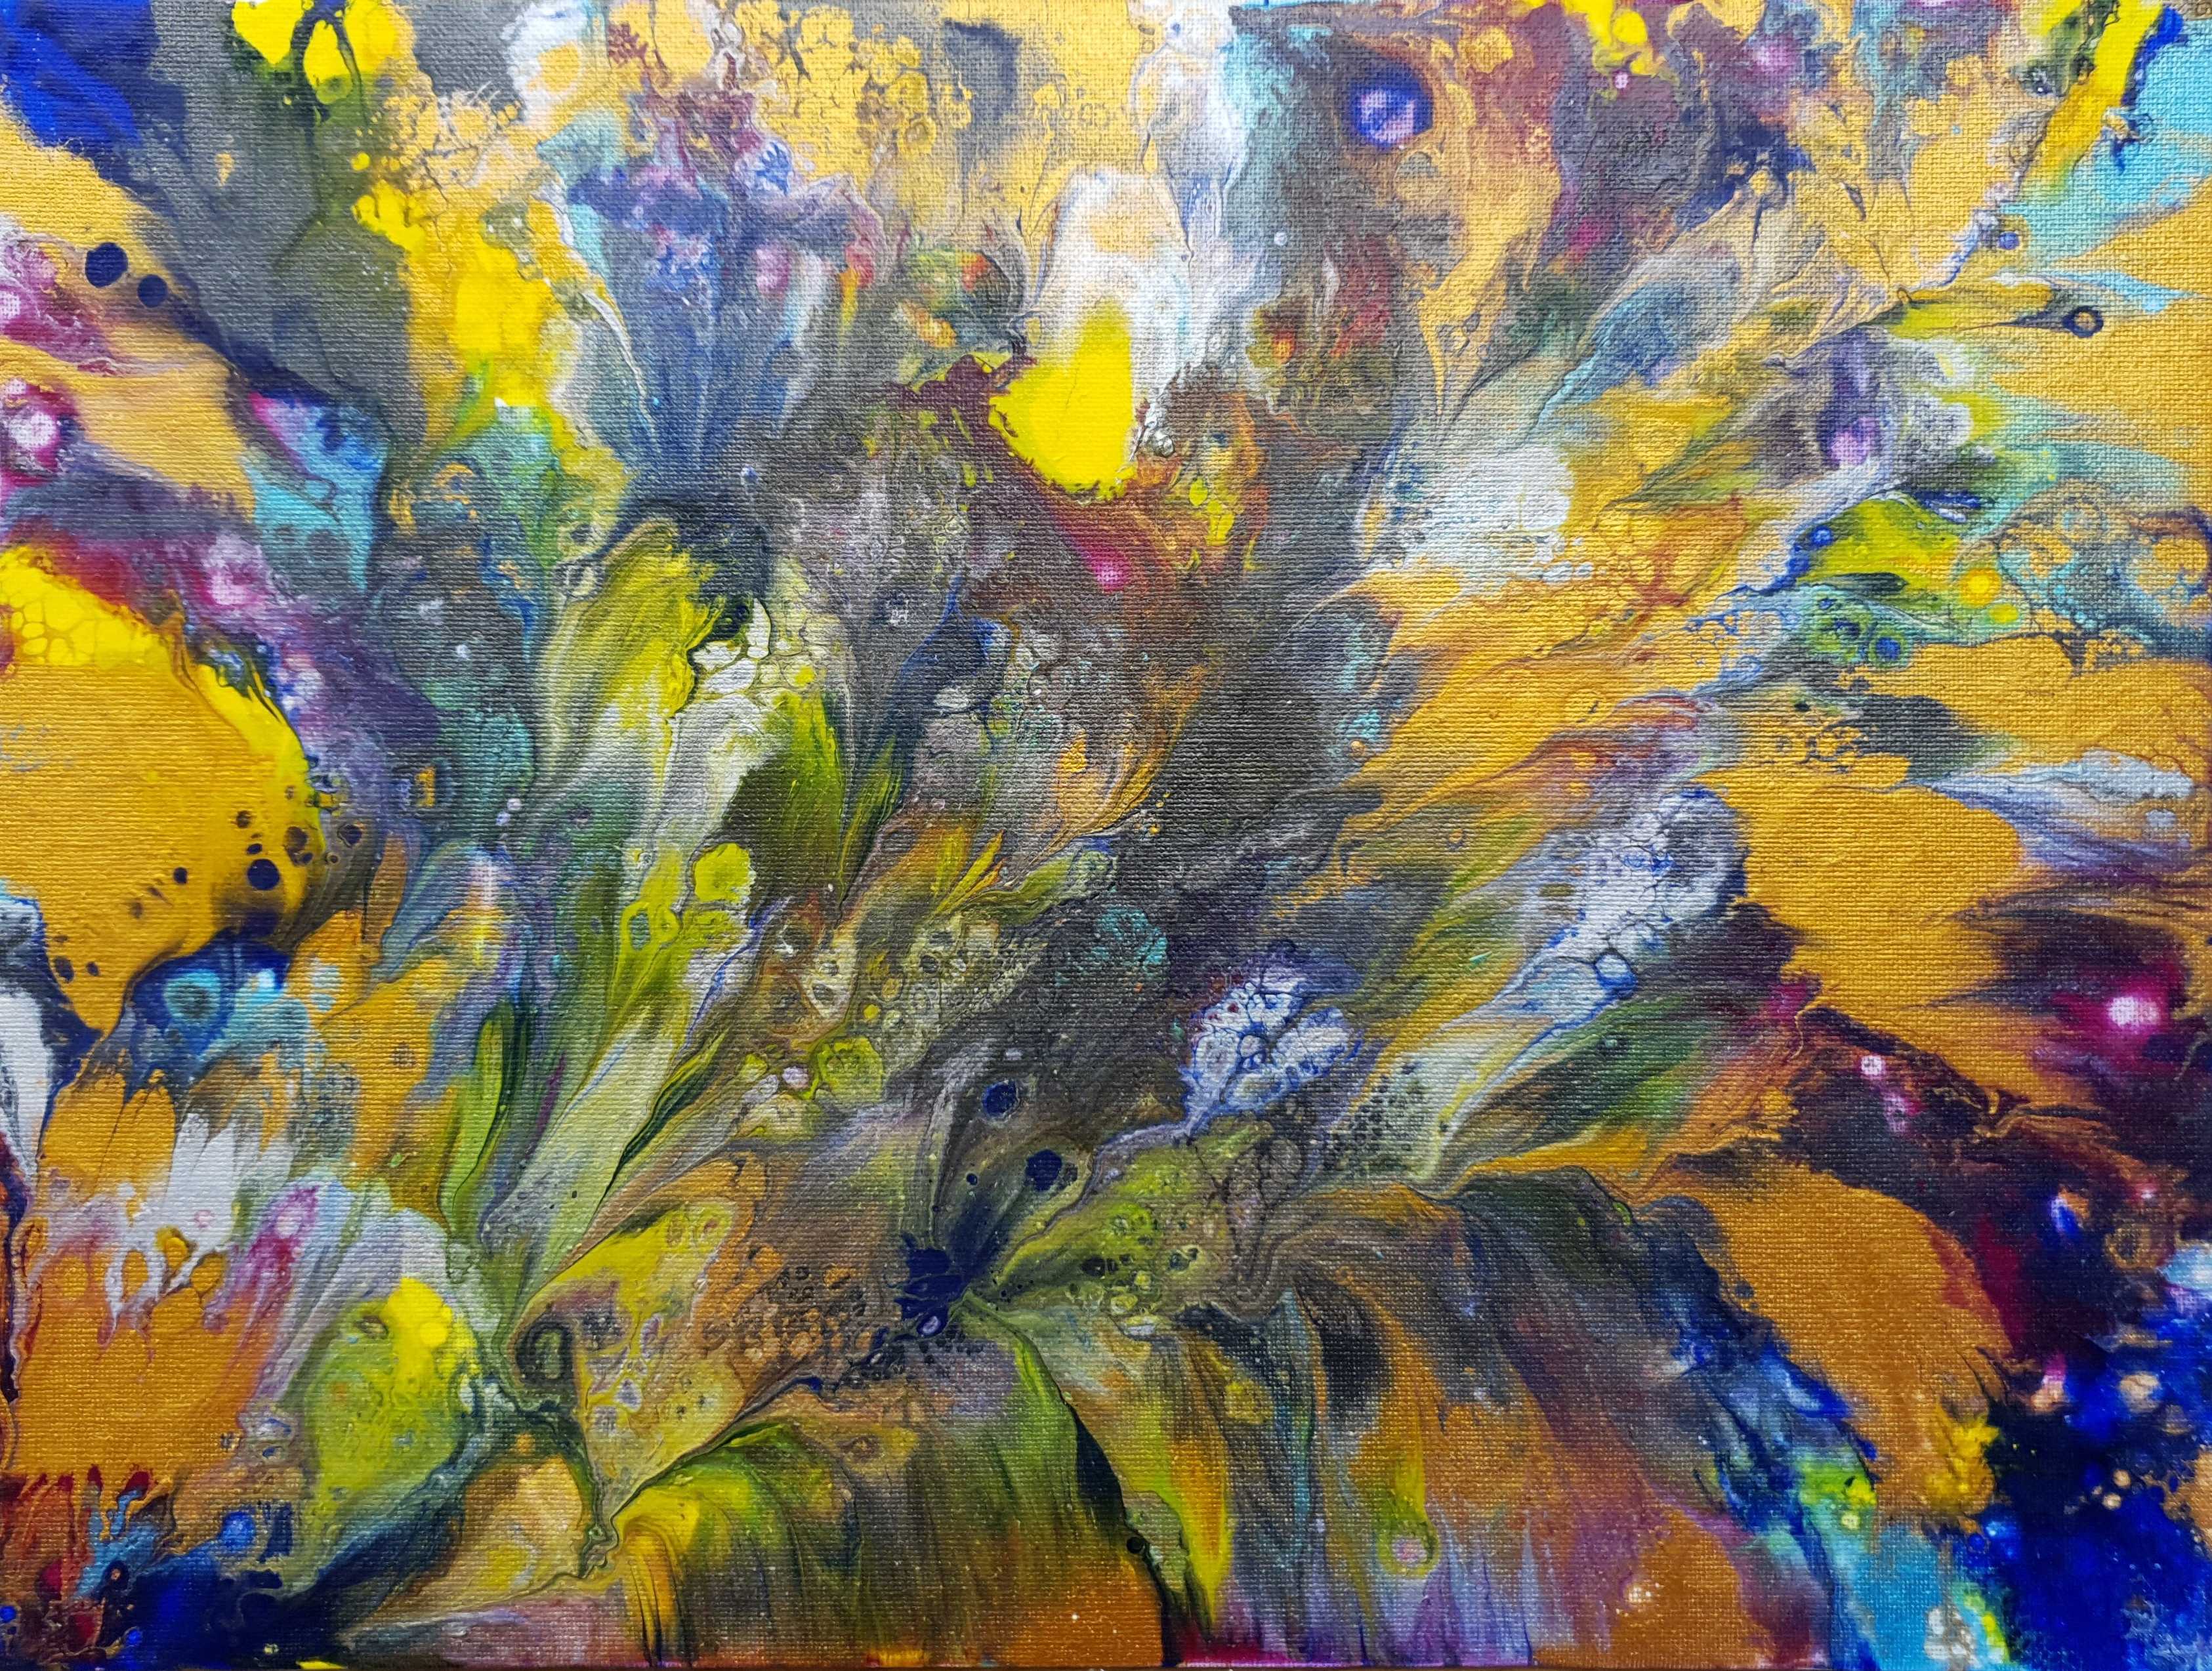 Abstract artwork inspired by tropical bird feathers